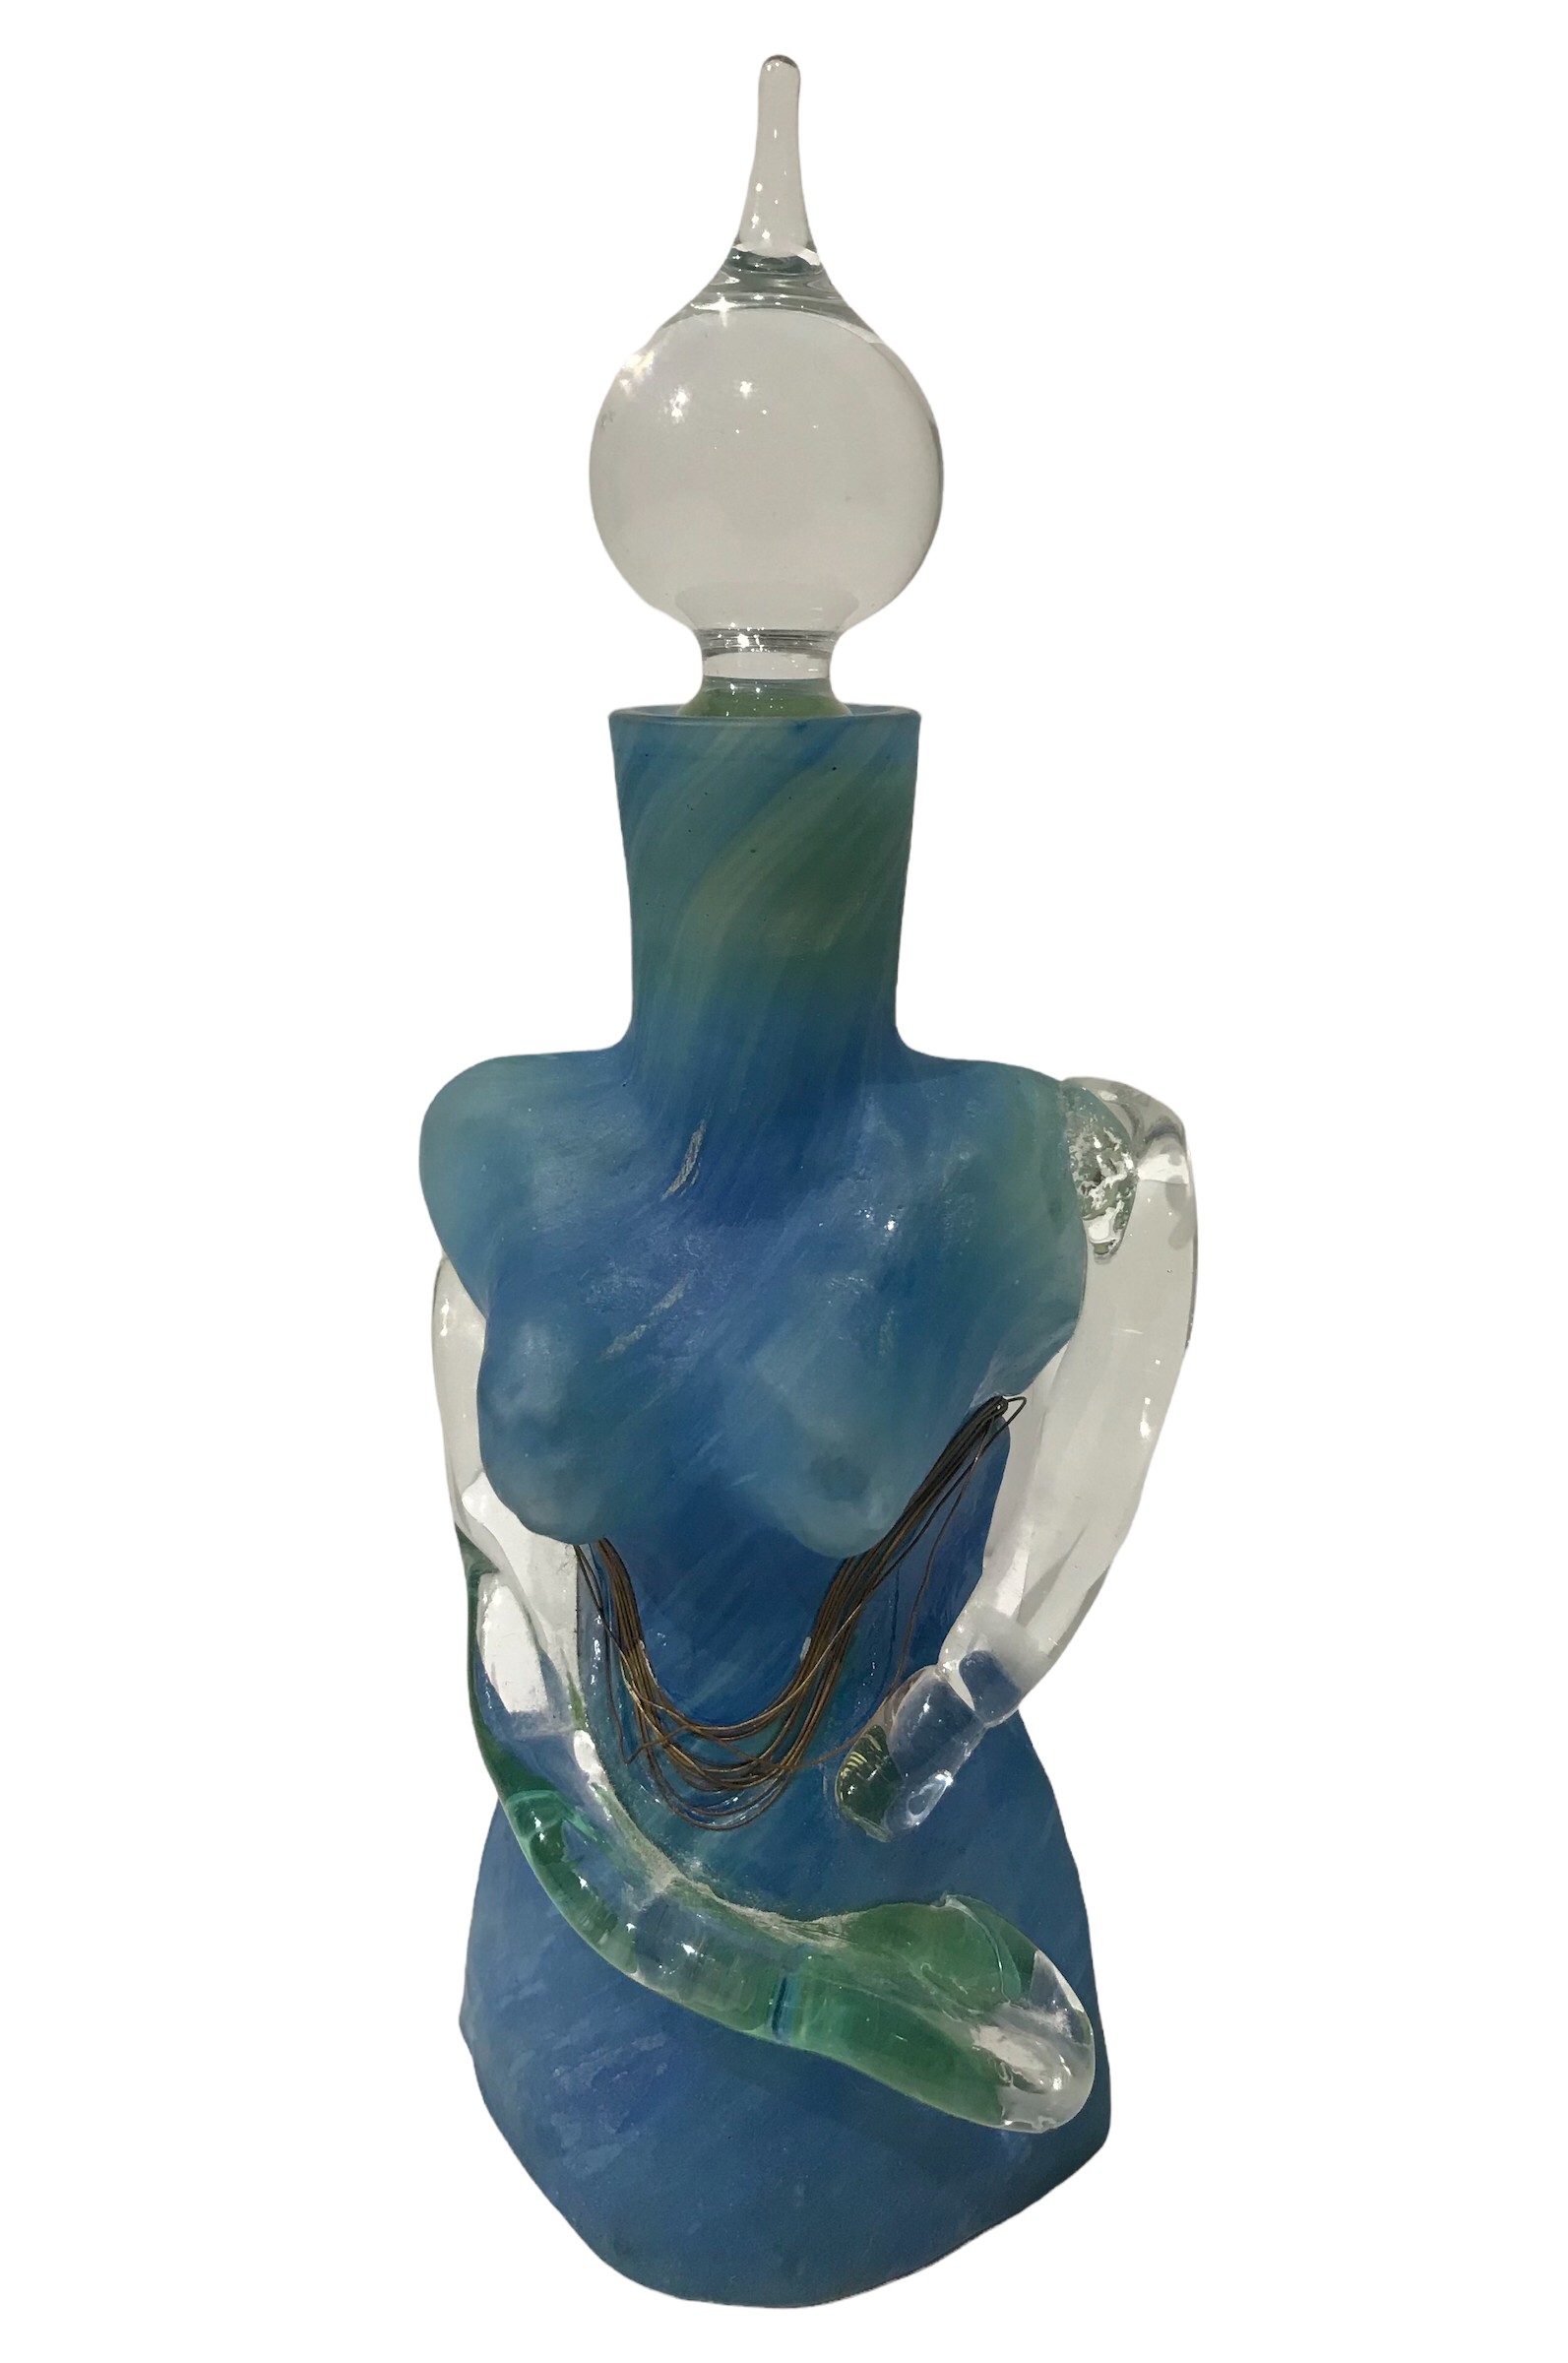 A MURANO STYLE ART GLASS BOTTLE AND STOPPER MODELLED AS A FEMALE TORSO.